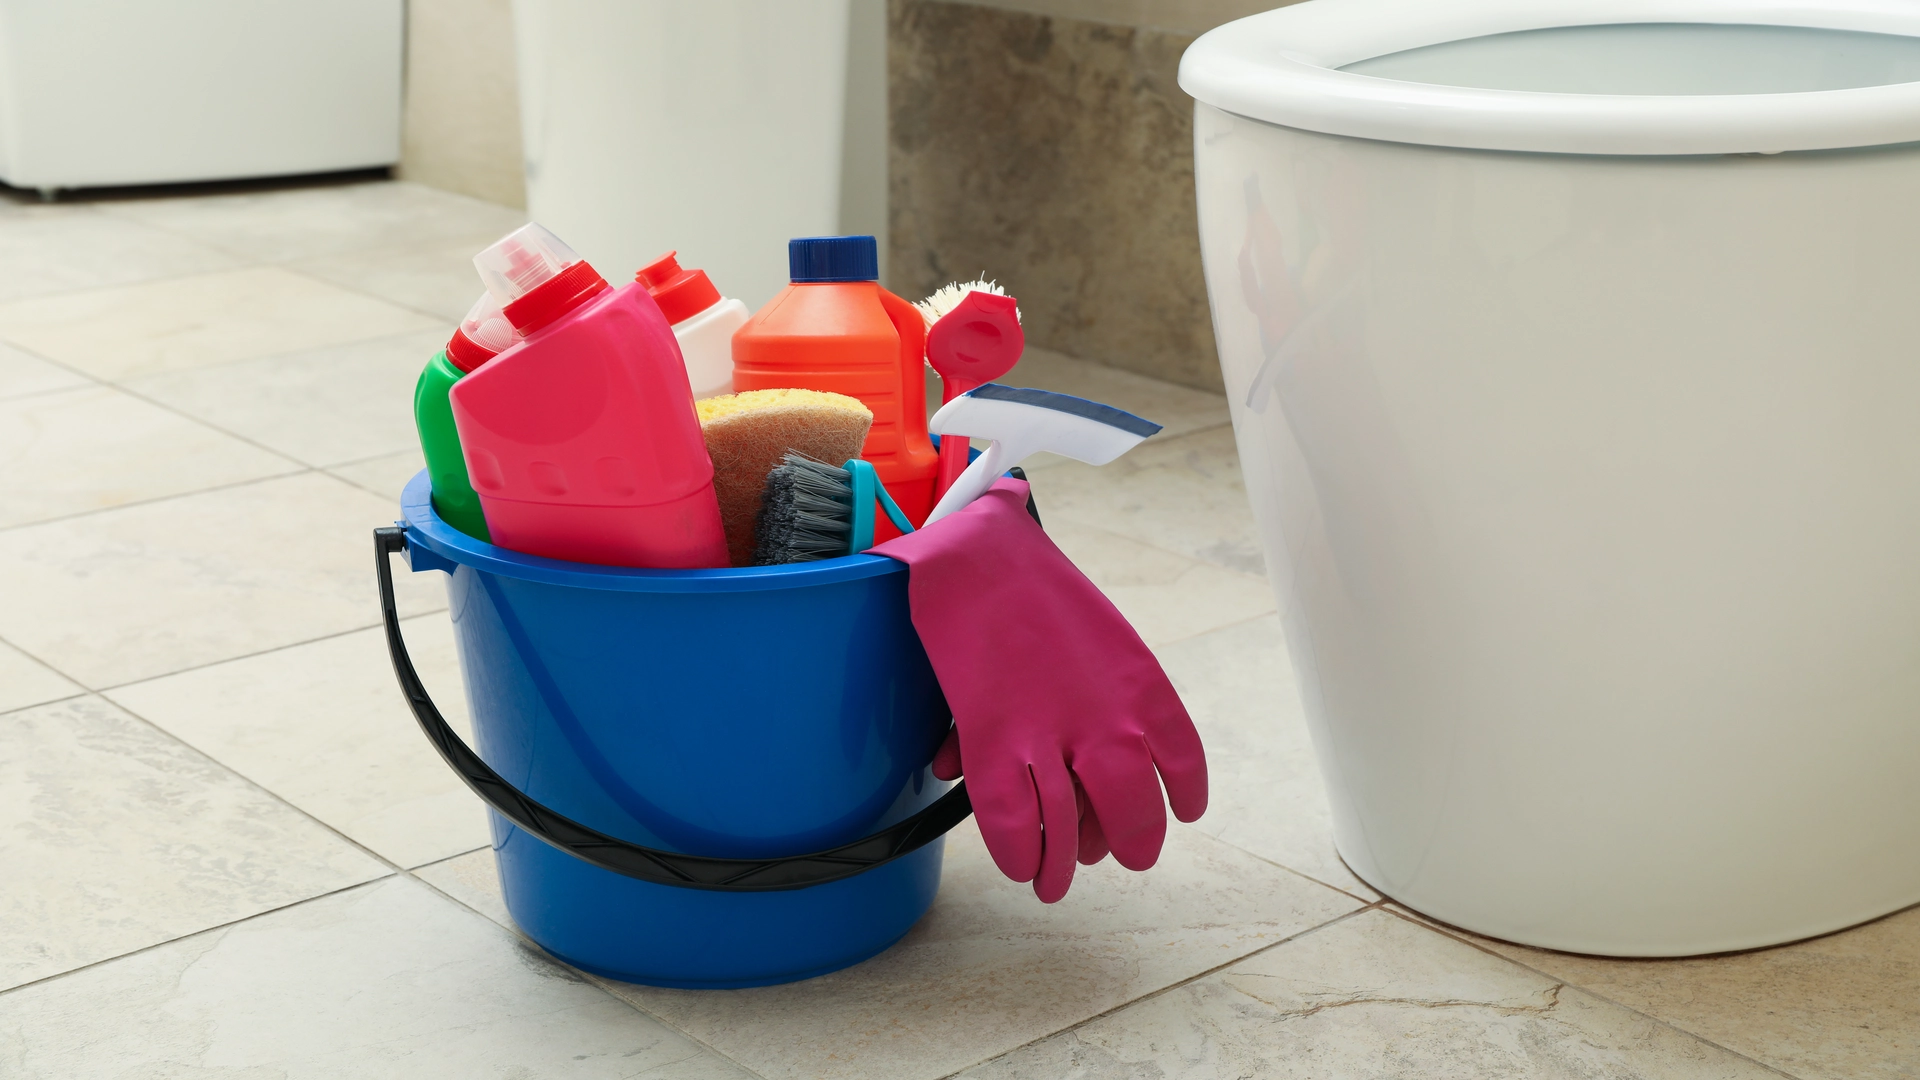 Use cleaning products to make bathroom clean and organized